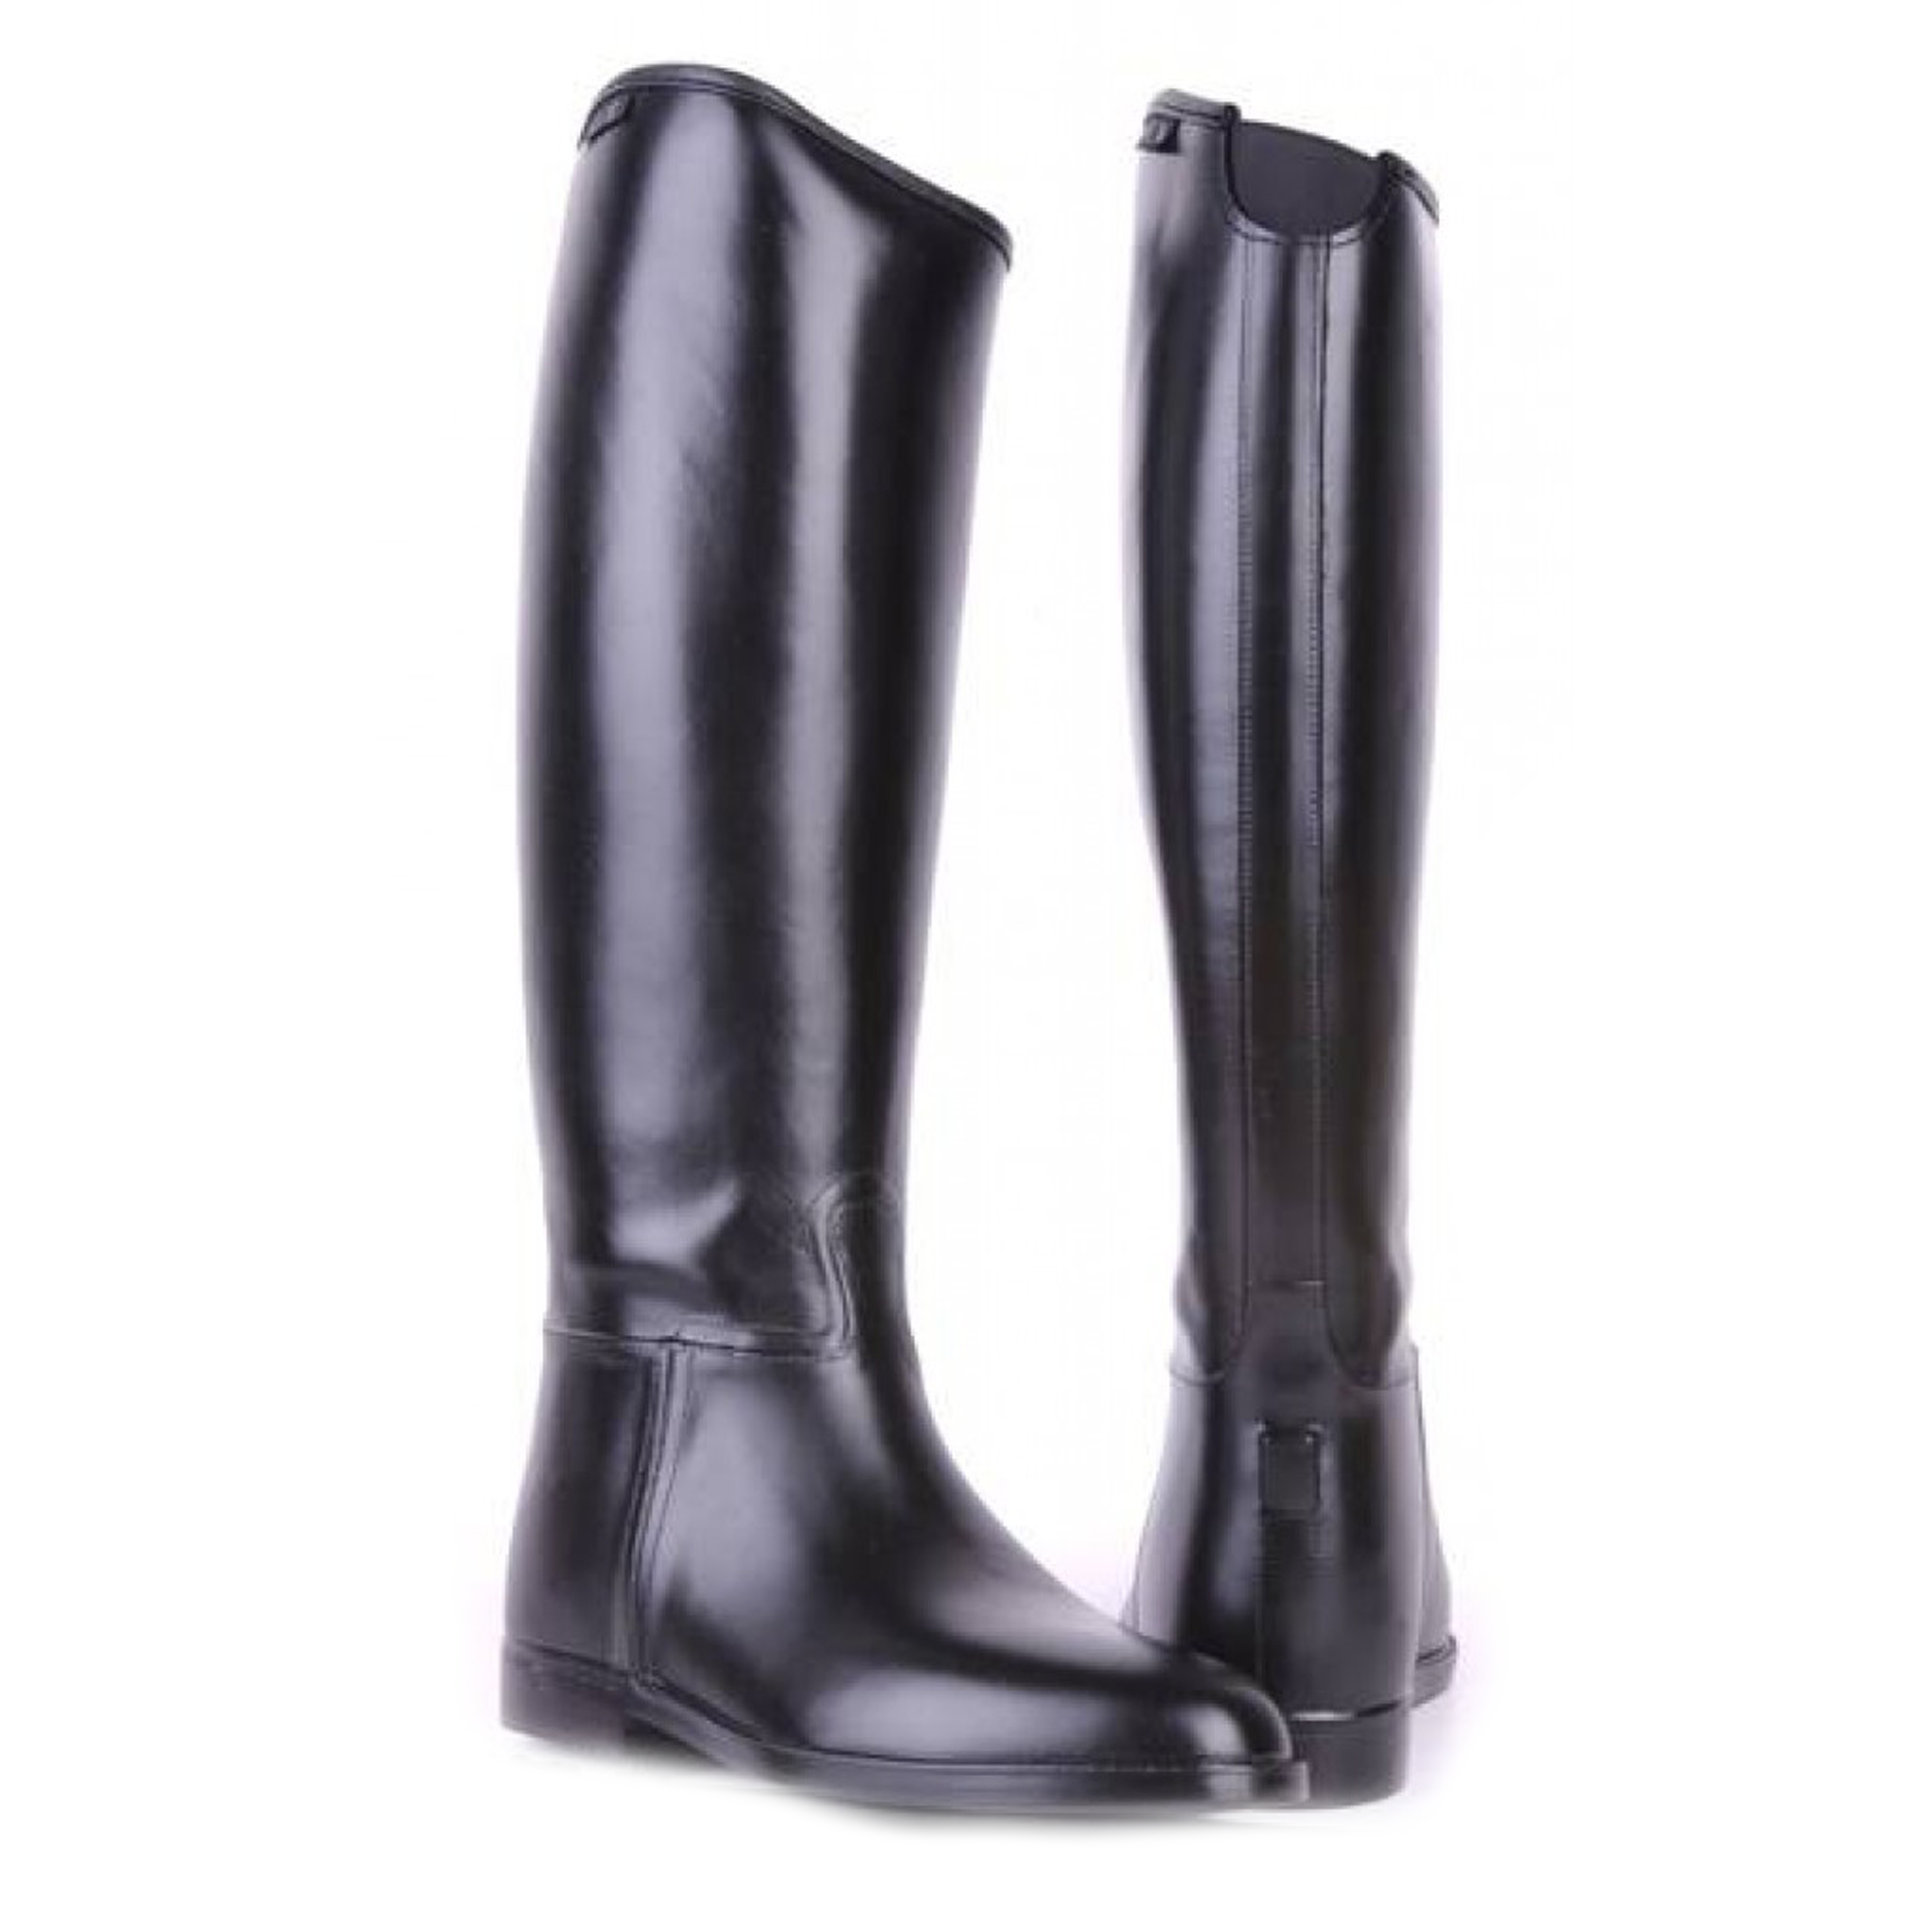 rubber riding boots